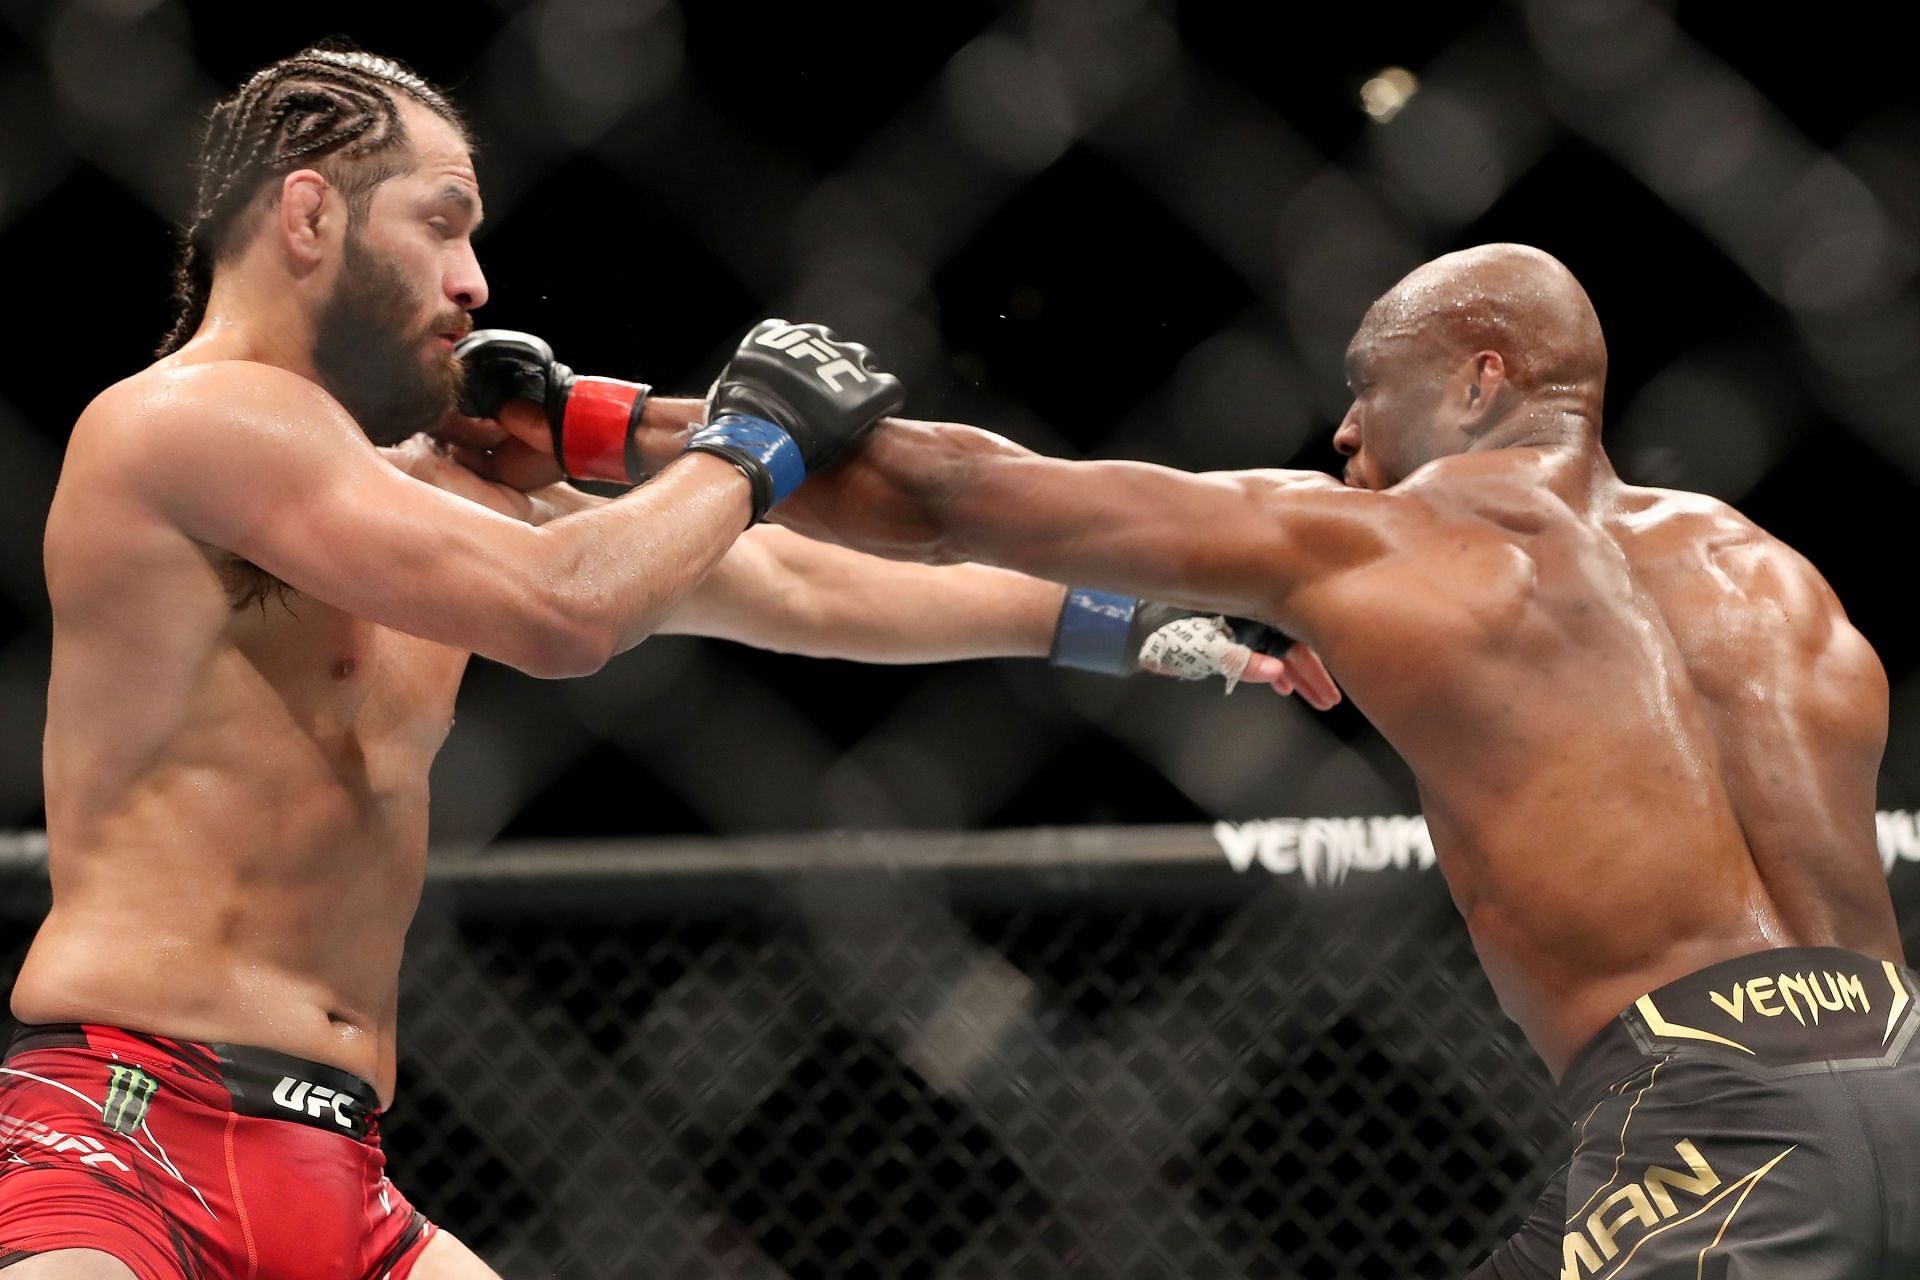 Jorge Masvidal had not really earned his second bout with Kamaru Usman